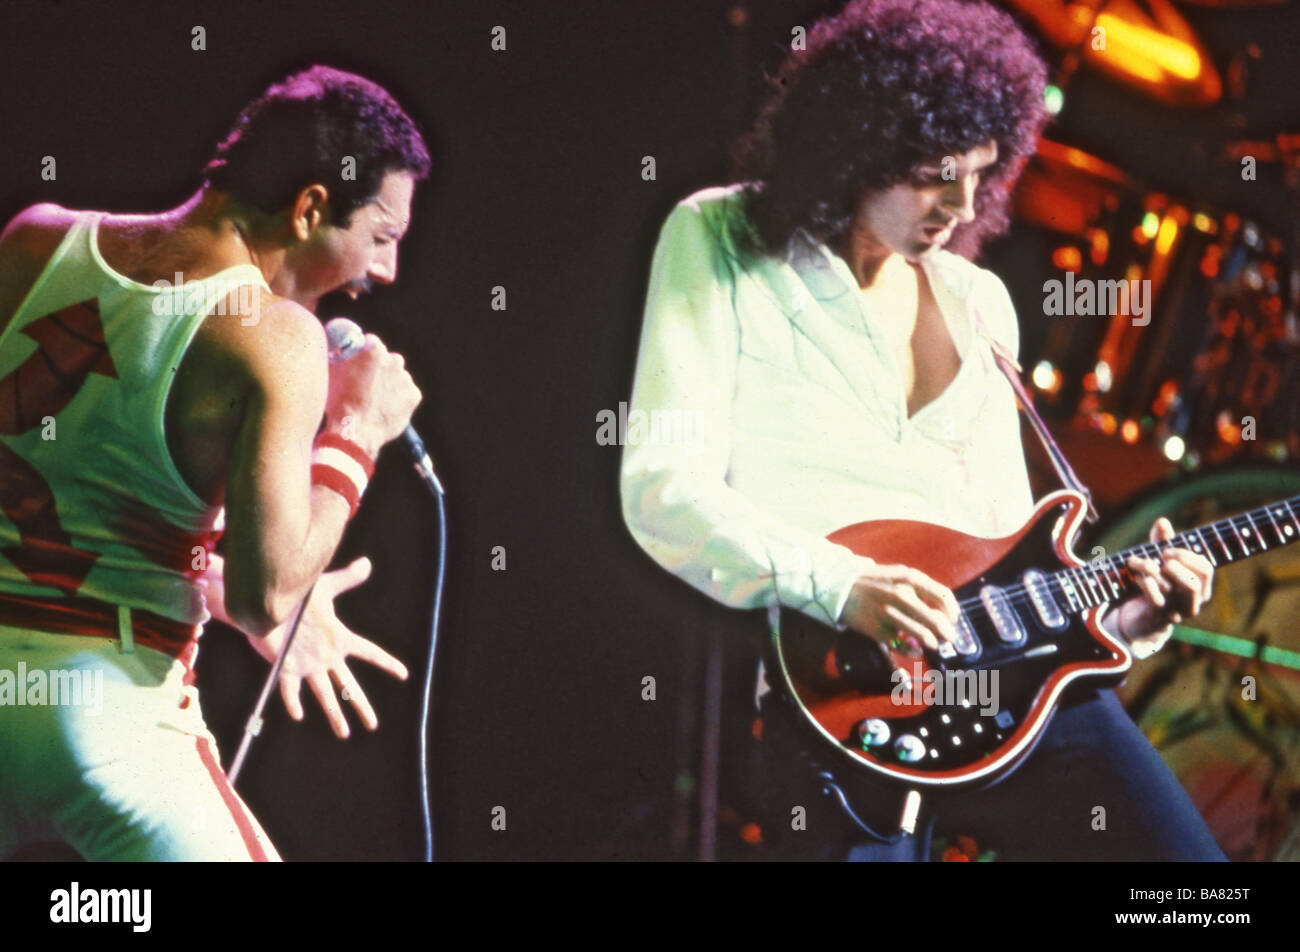 QUEEN with Freddie Mercury at left and Bran May Stock Photo